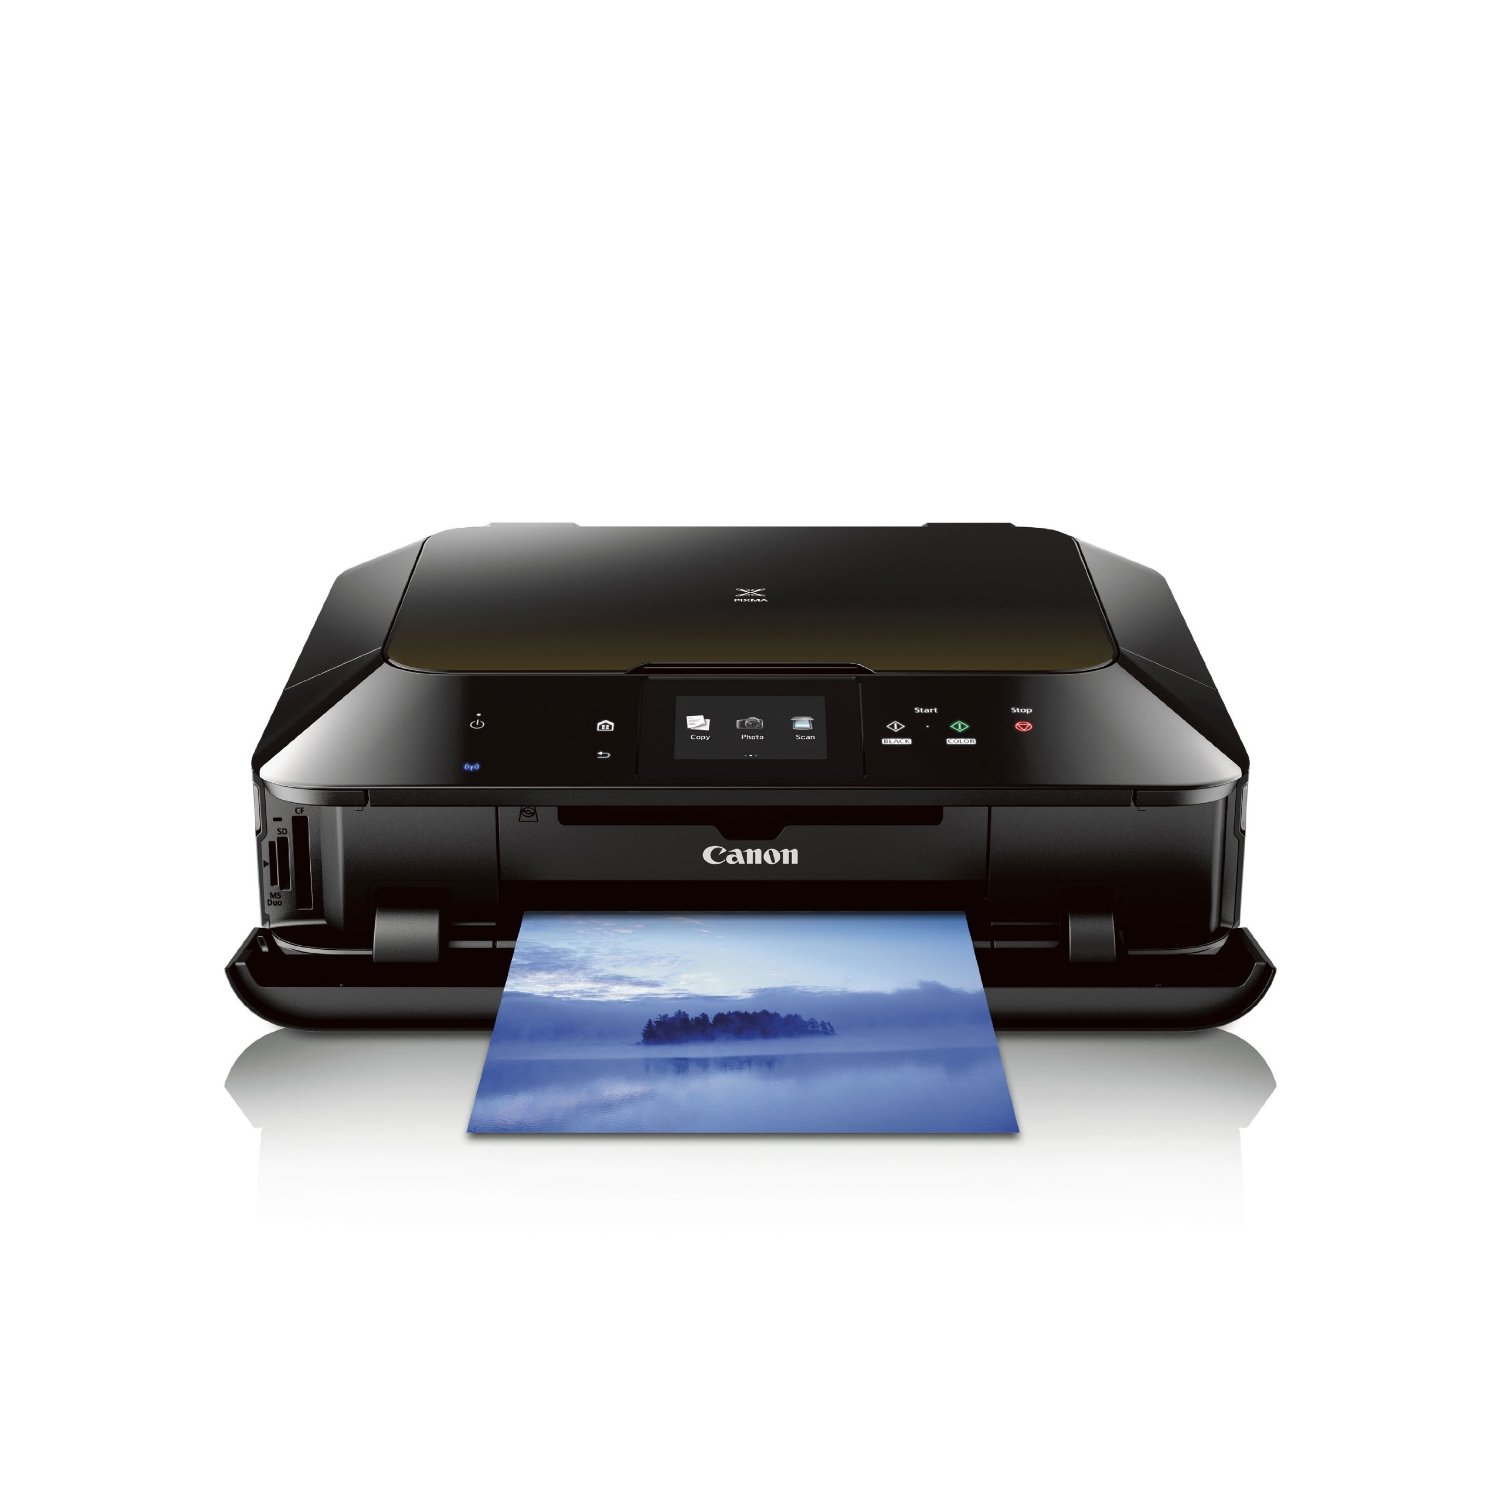 Canon PIXMA MG6320 Black Wireless Color Photo Printer with Scanner and Copier